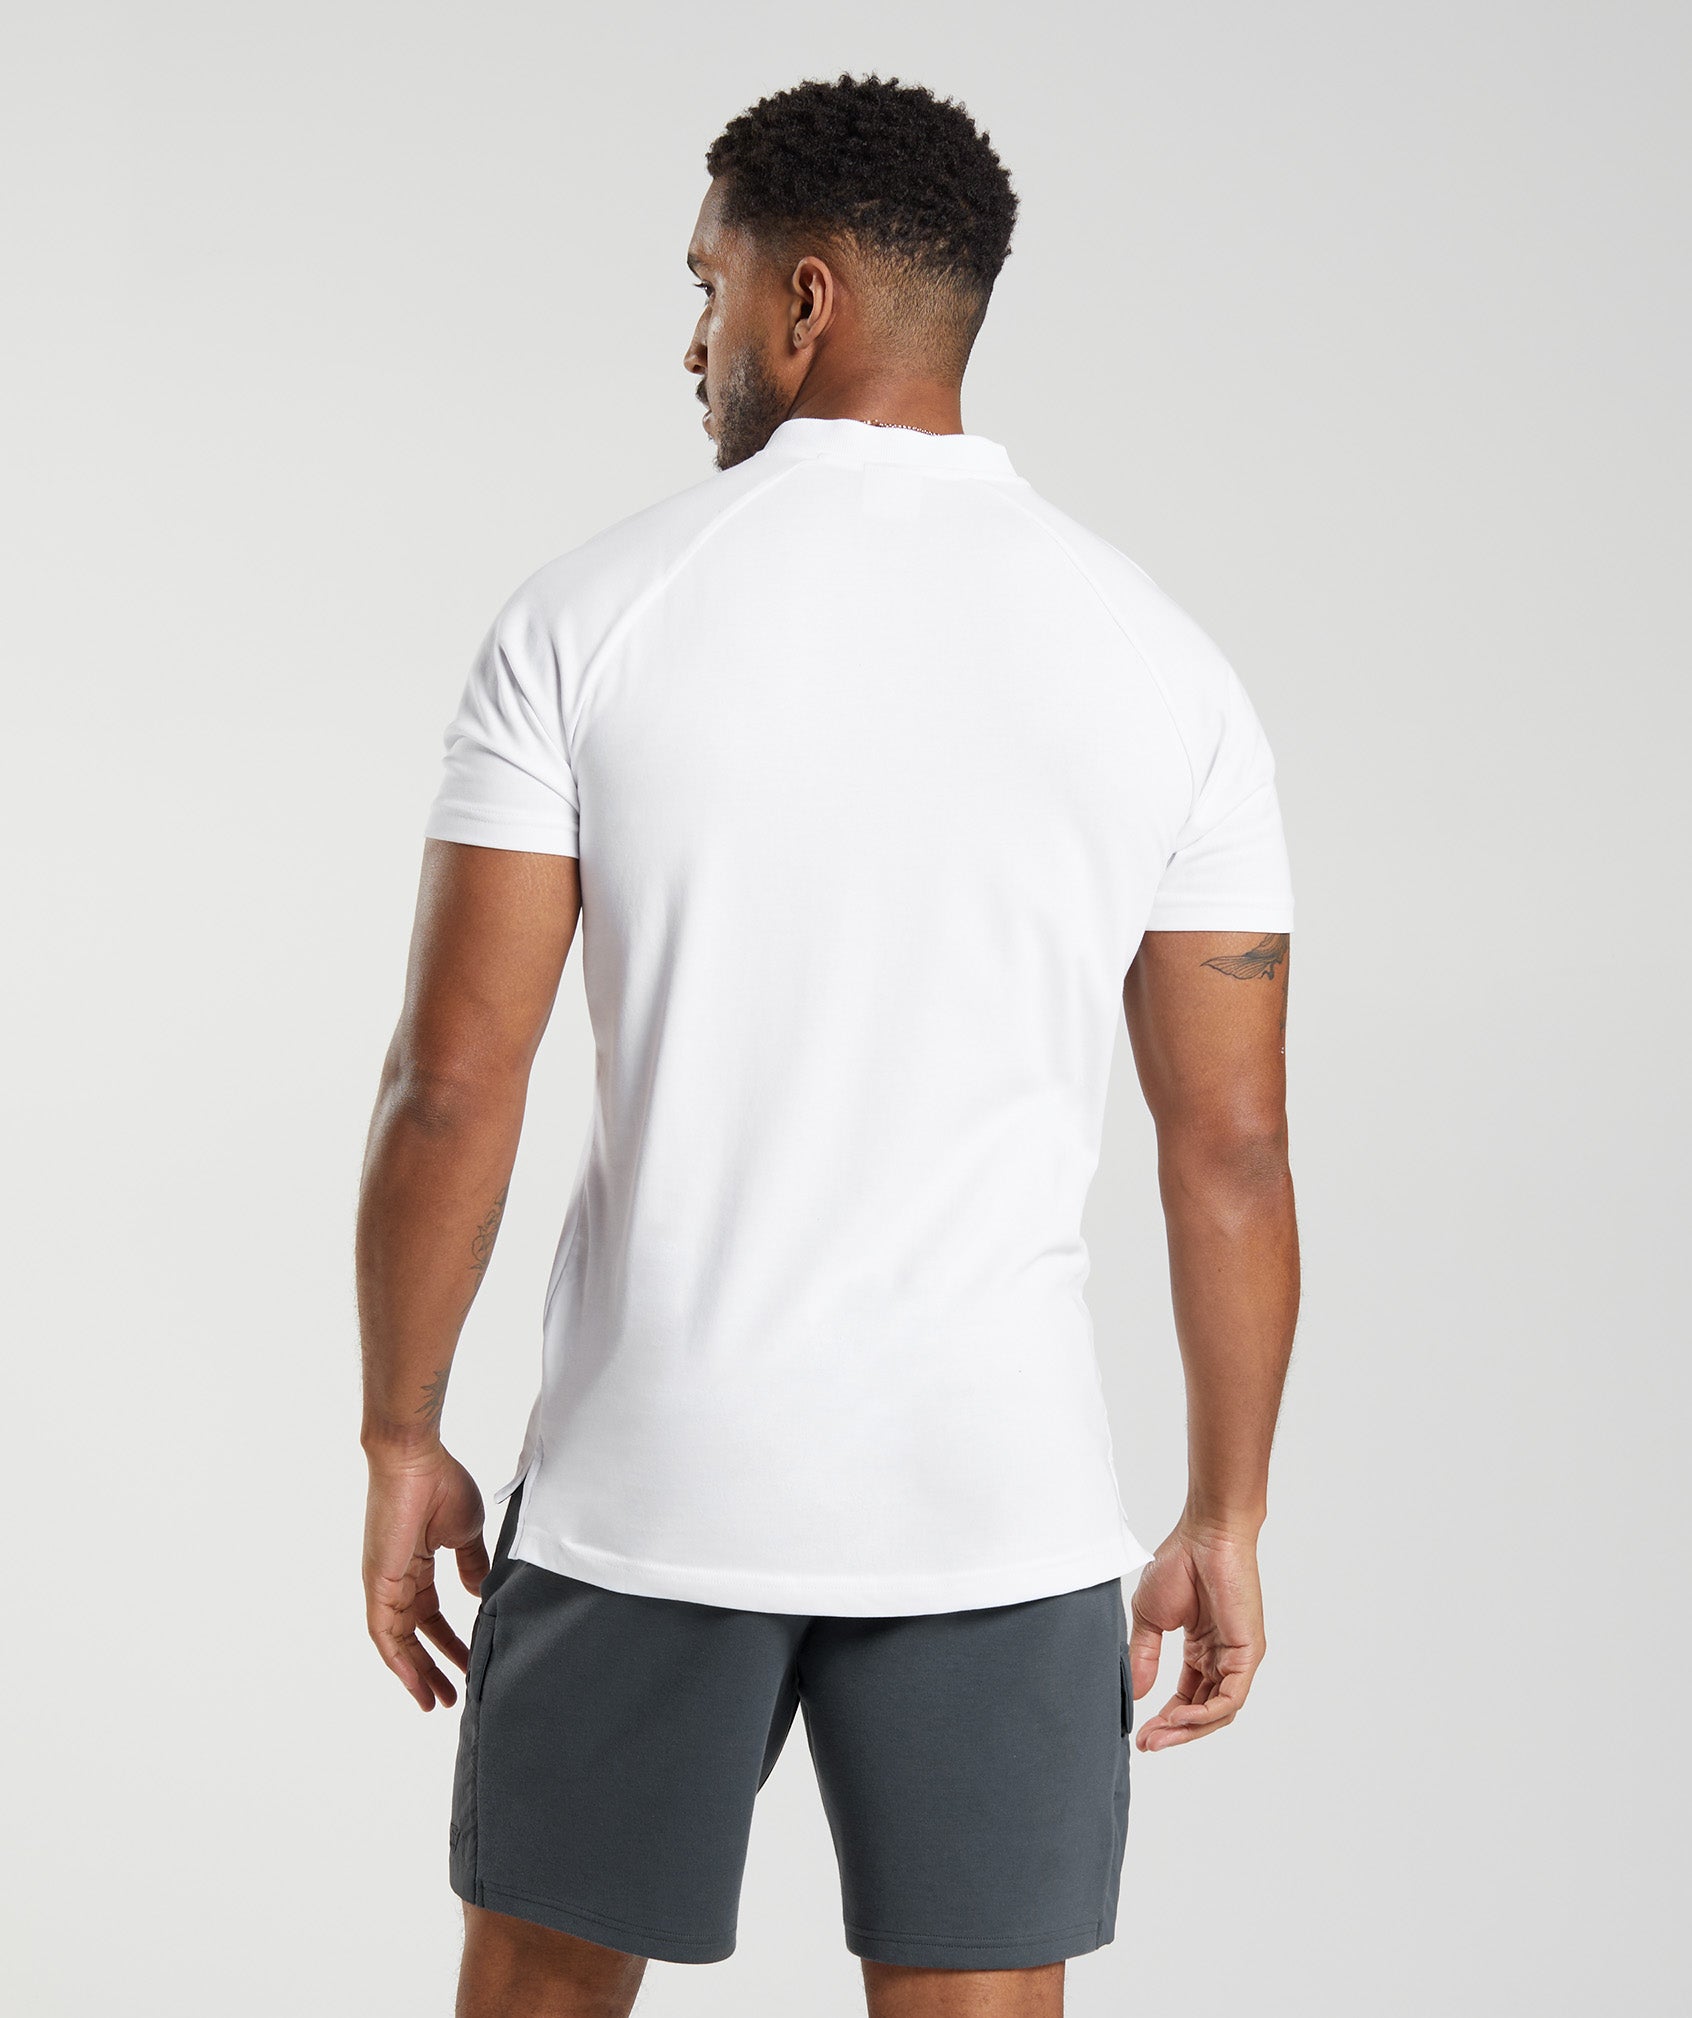 Rest Day Commute Polo Shirt in White - view 2